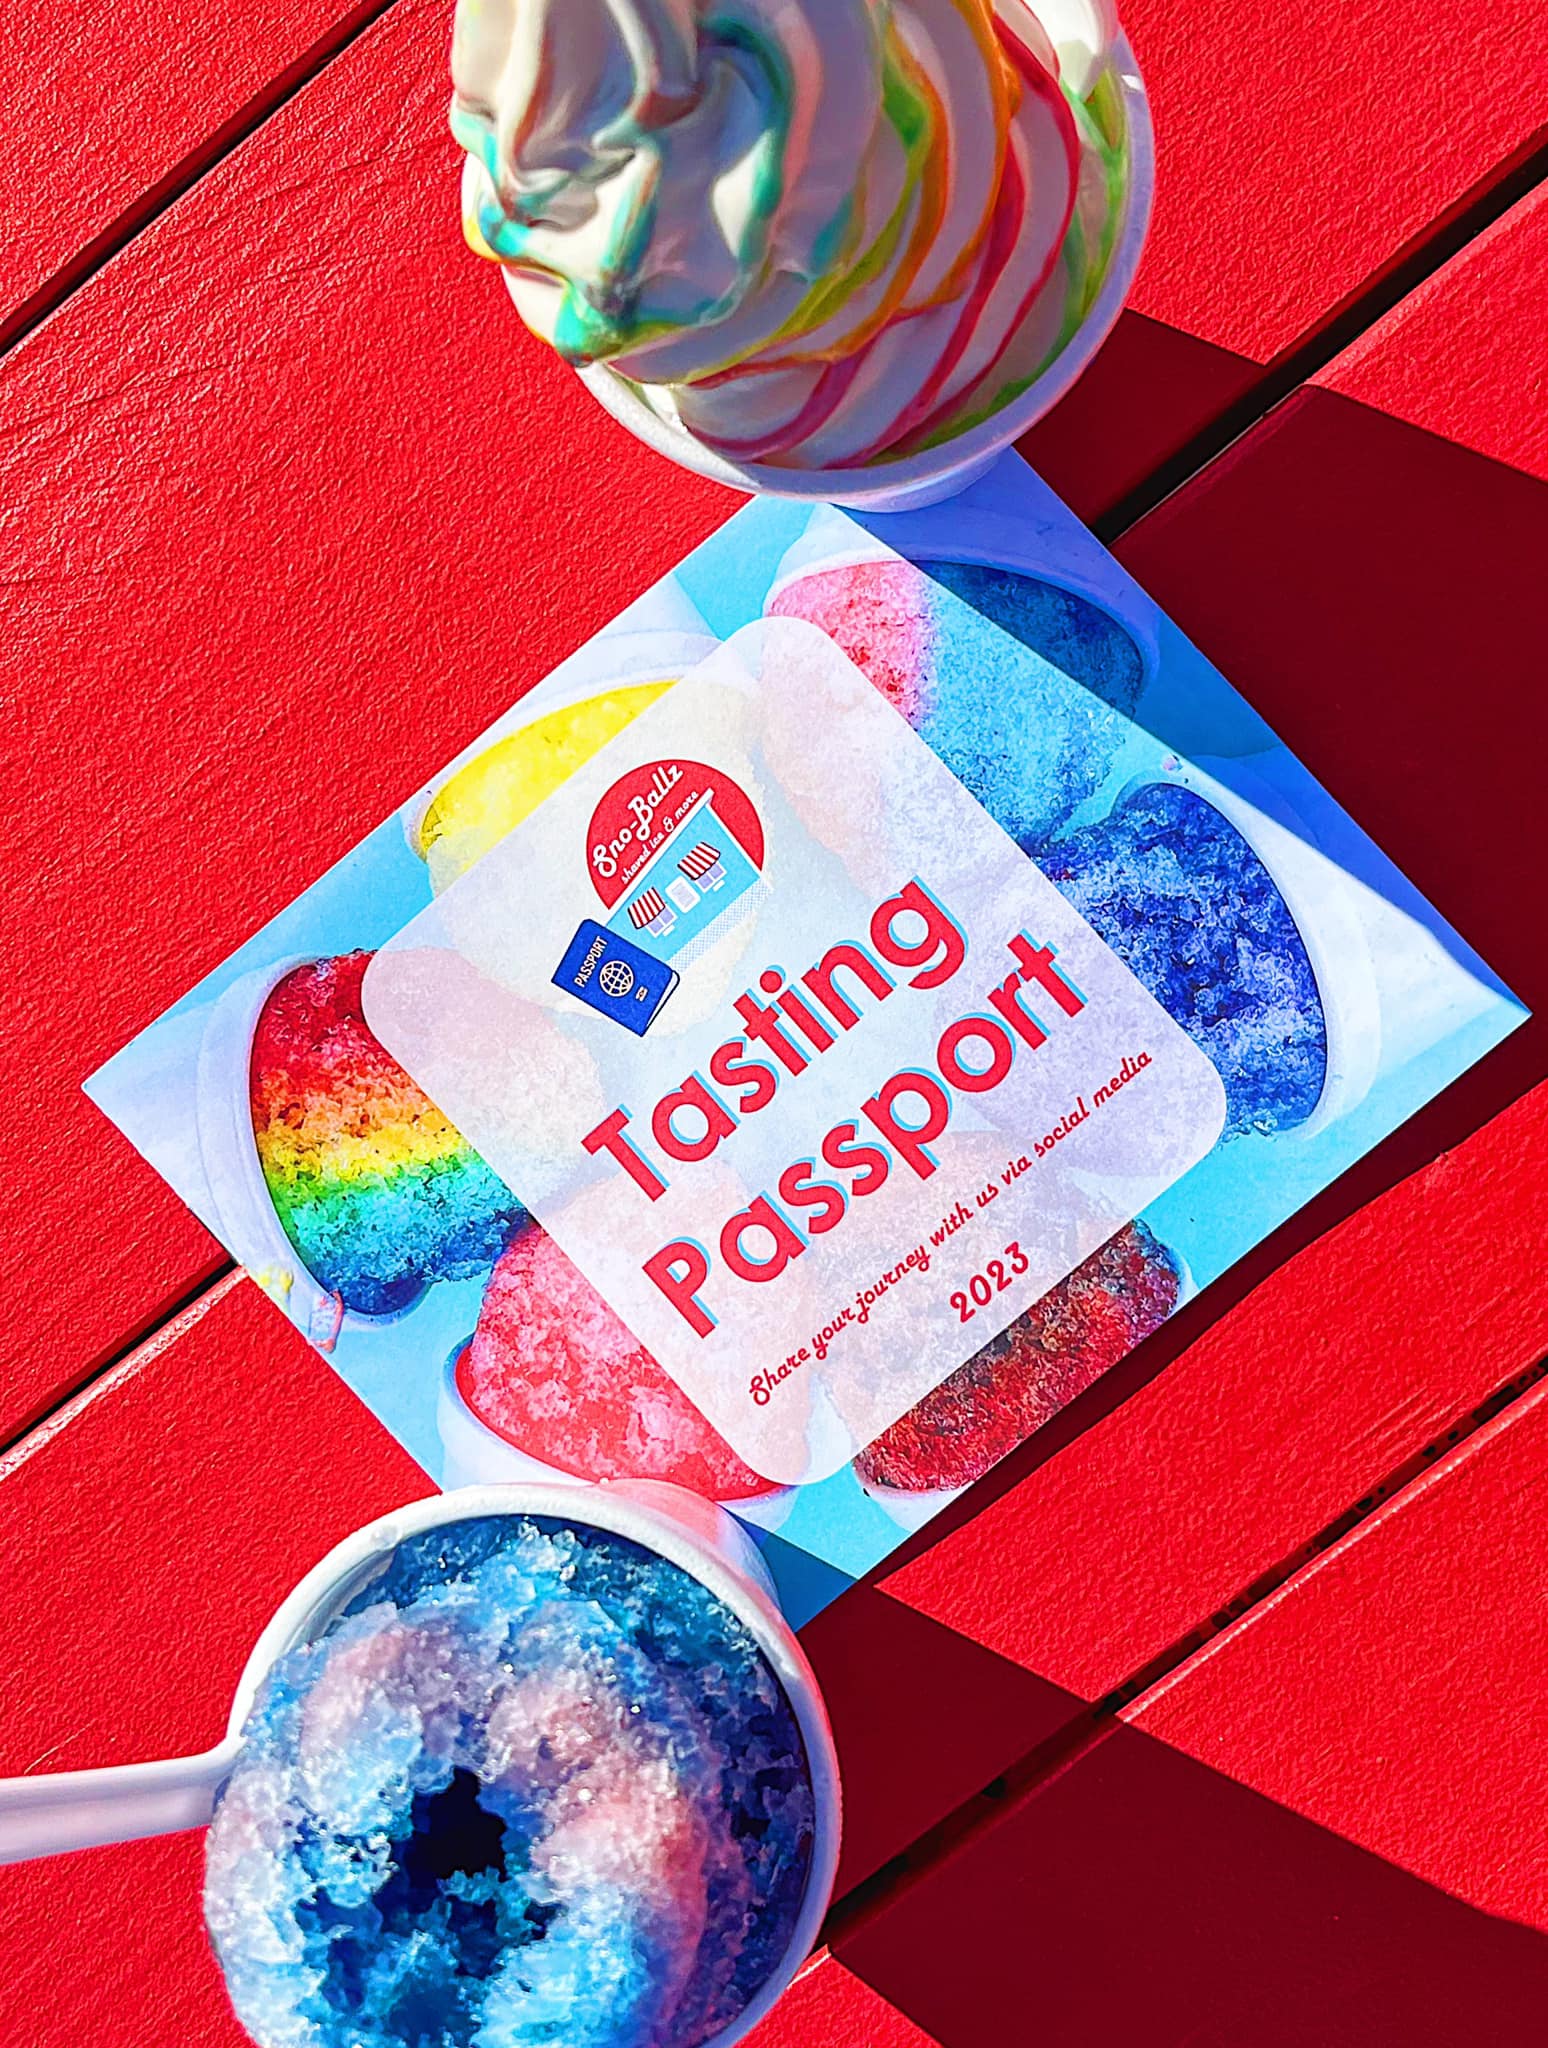 A dish of Hawaiian shaved ice and a dish of ice cream sit on a red table next to a "Tasting Passport" from Sno-Ballz